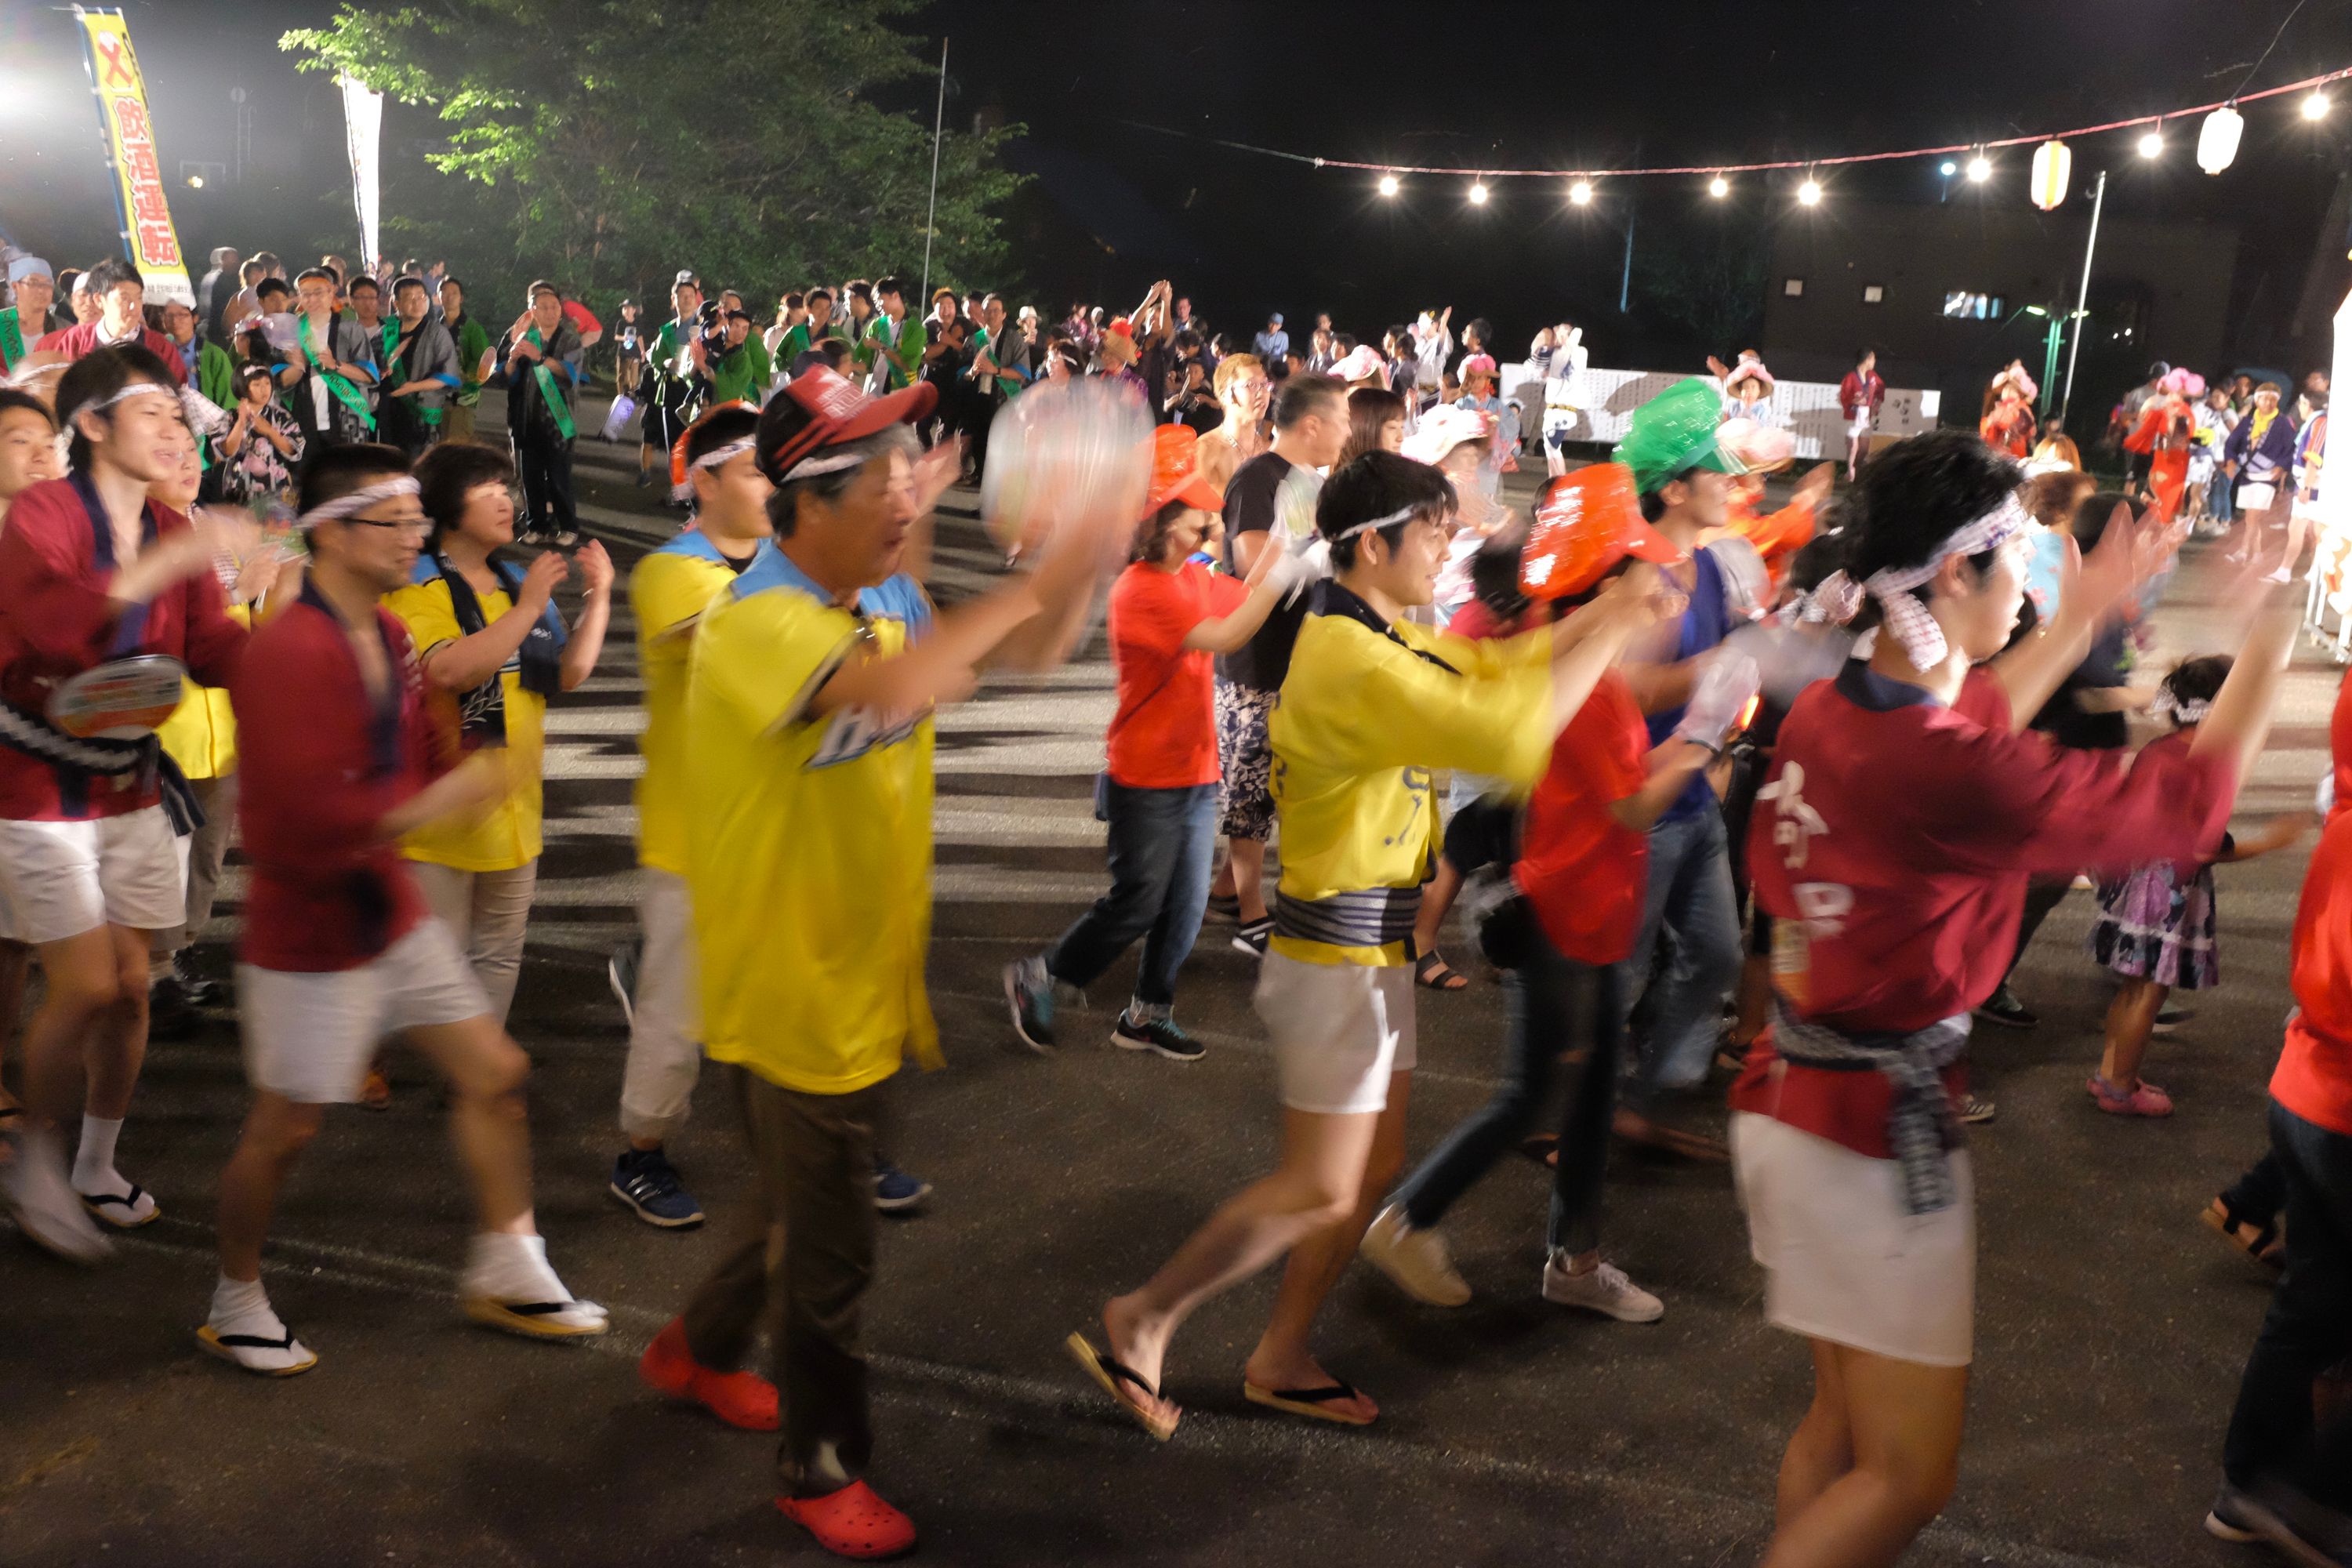 Groups of people in festival uniforms dancing at night.